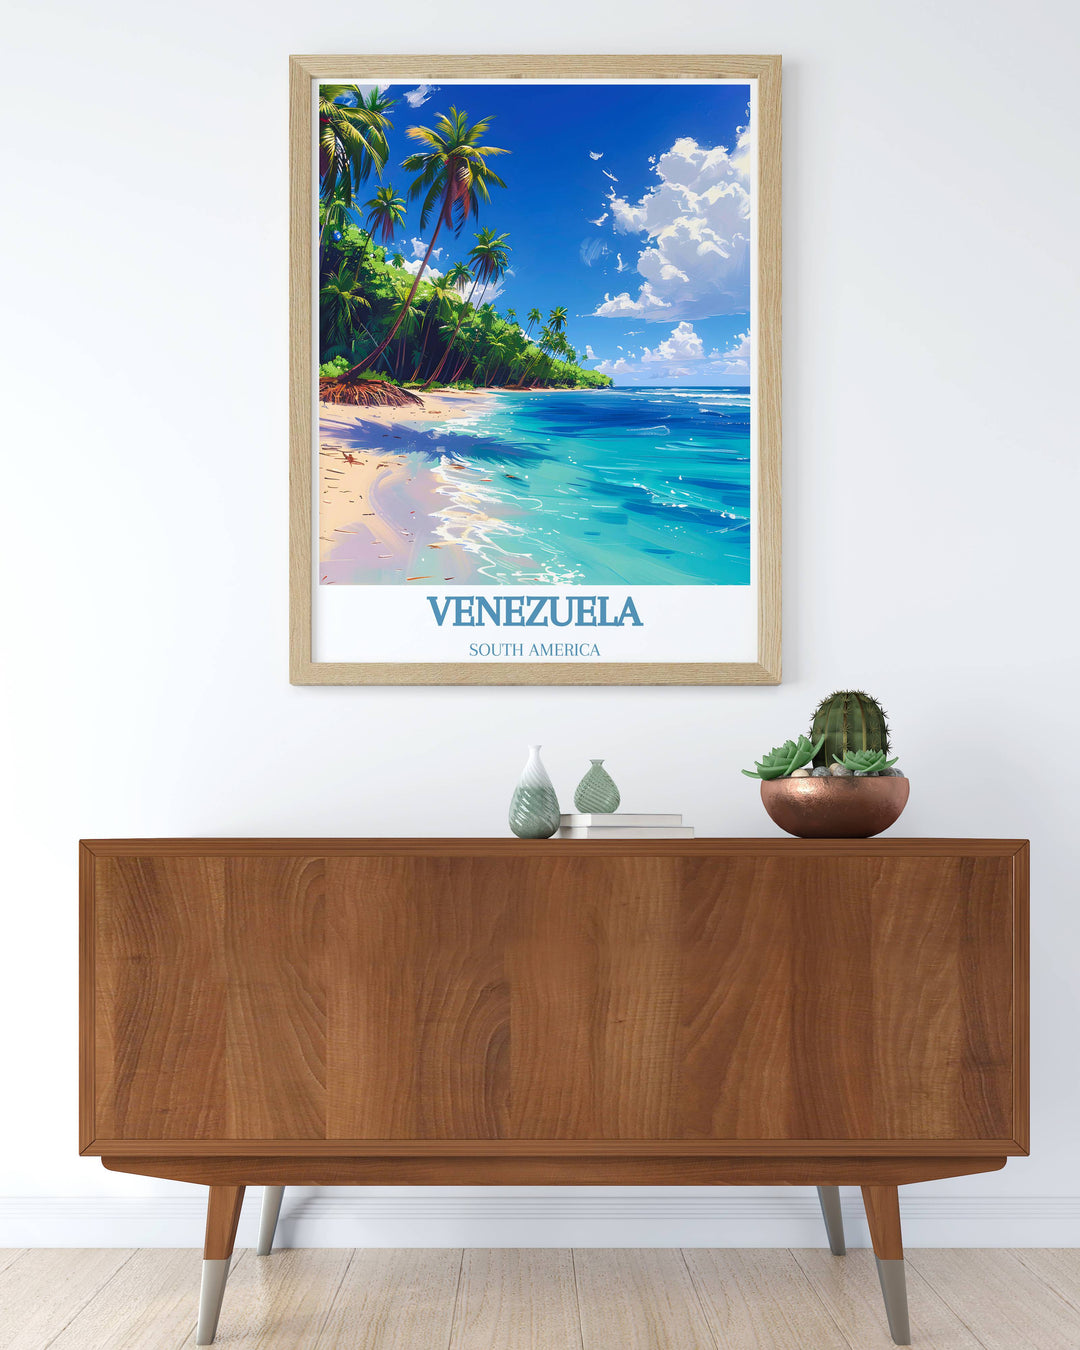 Custom print of Morrocoys serene beaches and vibrant coral reefs, ideal for creating a gallery wall that celebrates travel and adventure.